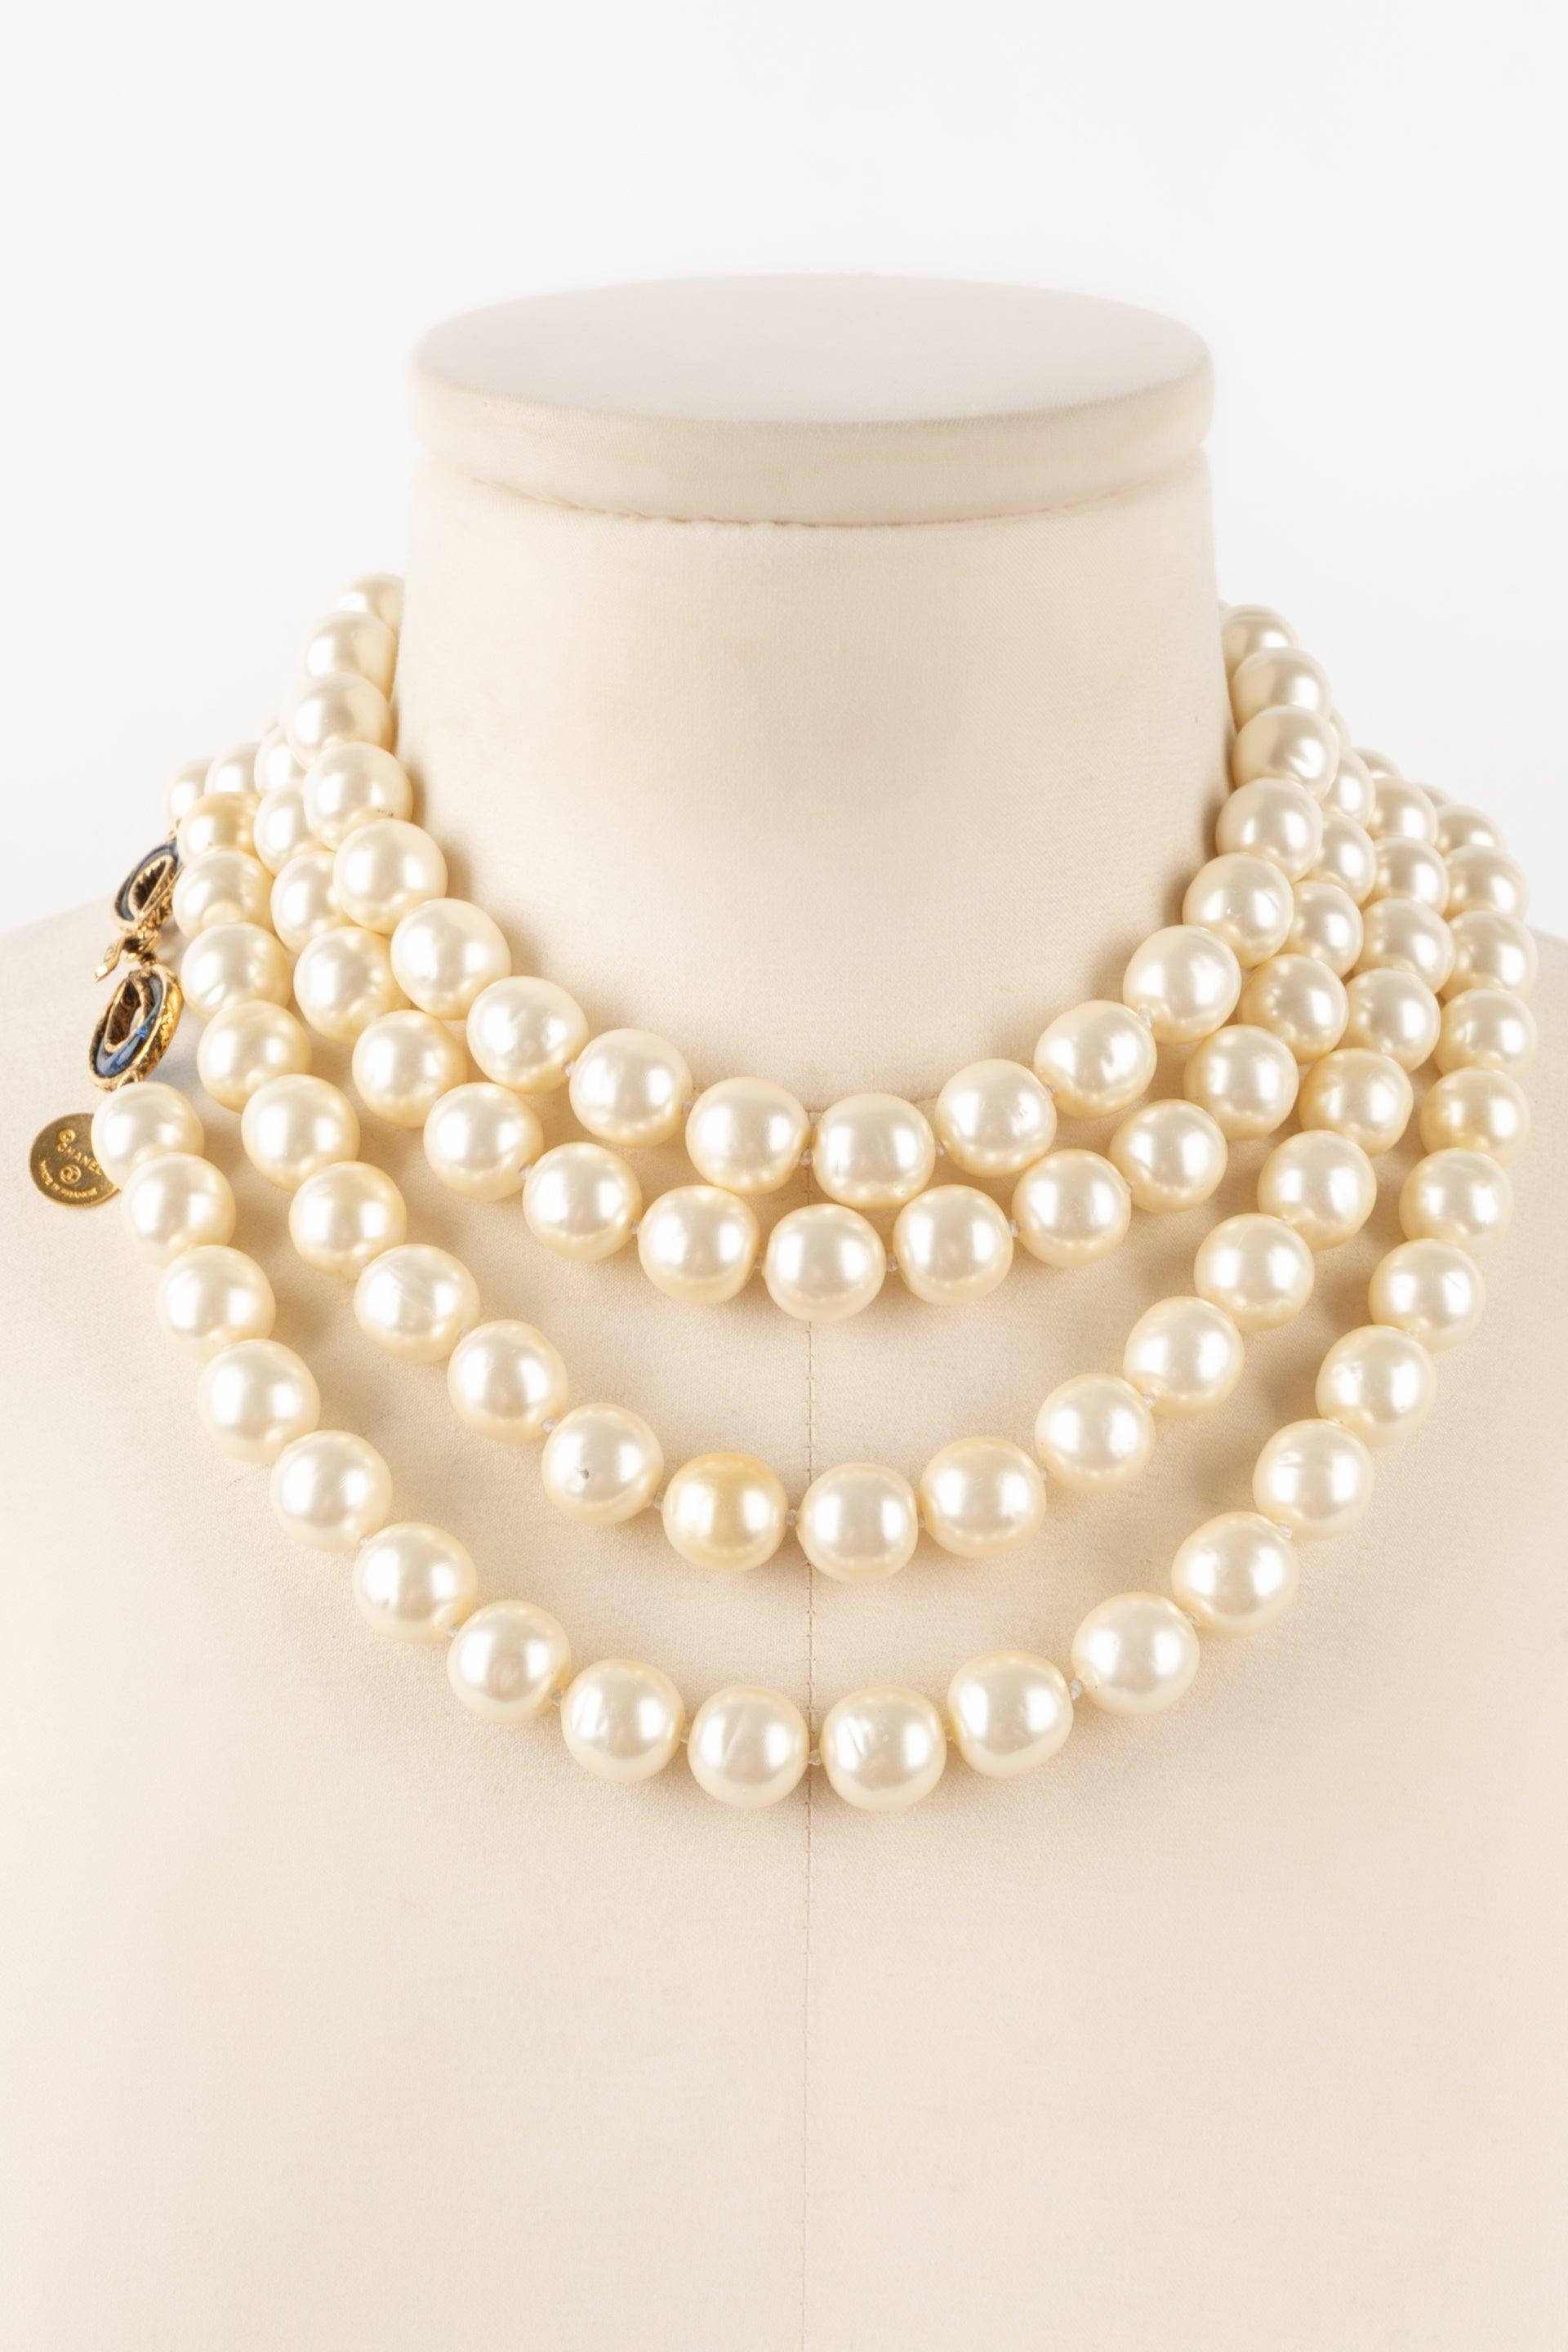 Chanel Necklace / Sautoir with Pearls and Blue Glass In Excellent Condition For Sale In SAINT-OUEN-SUR-SEINE, FR